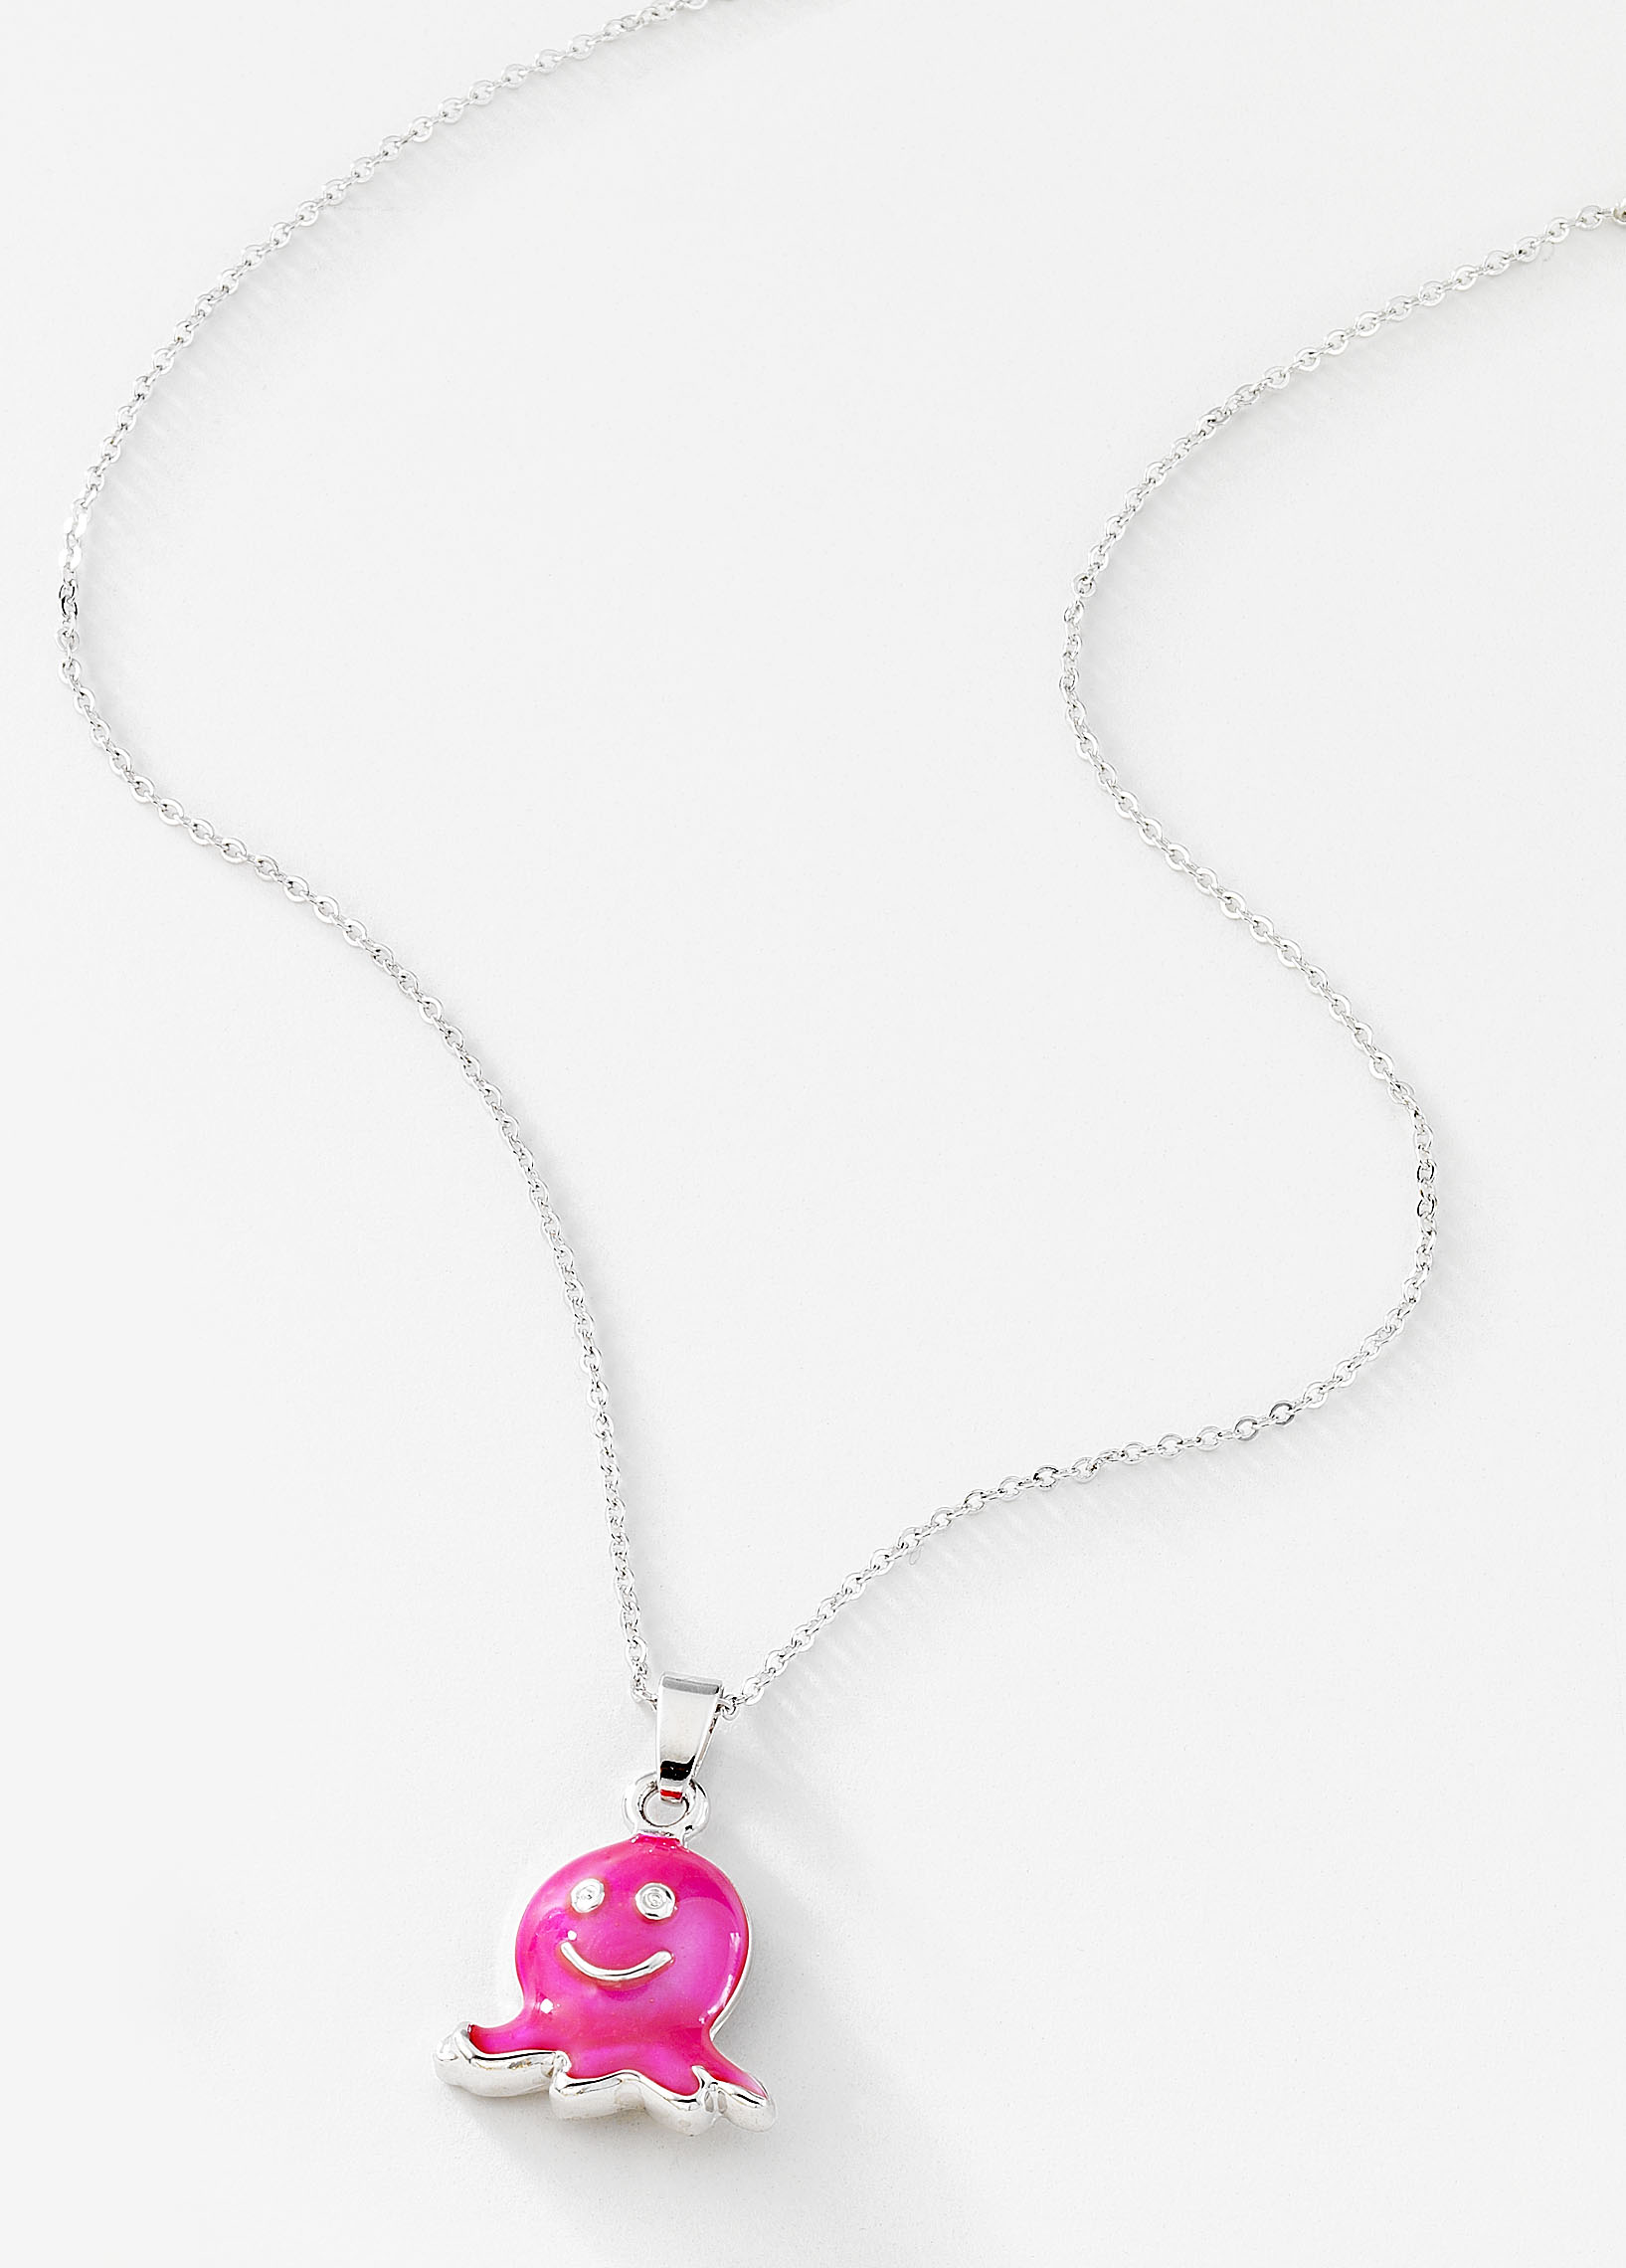 Girls necklace: 4151074